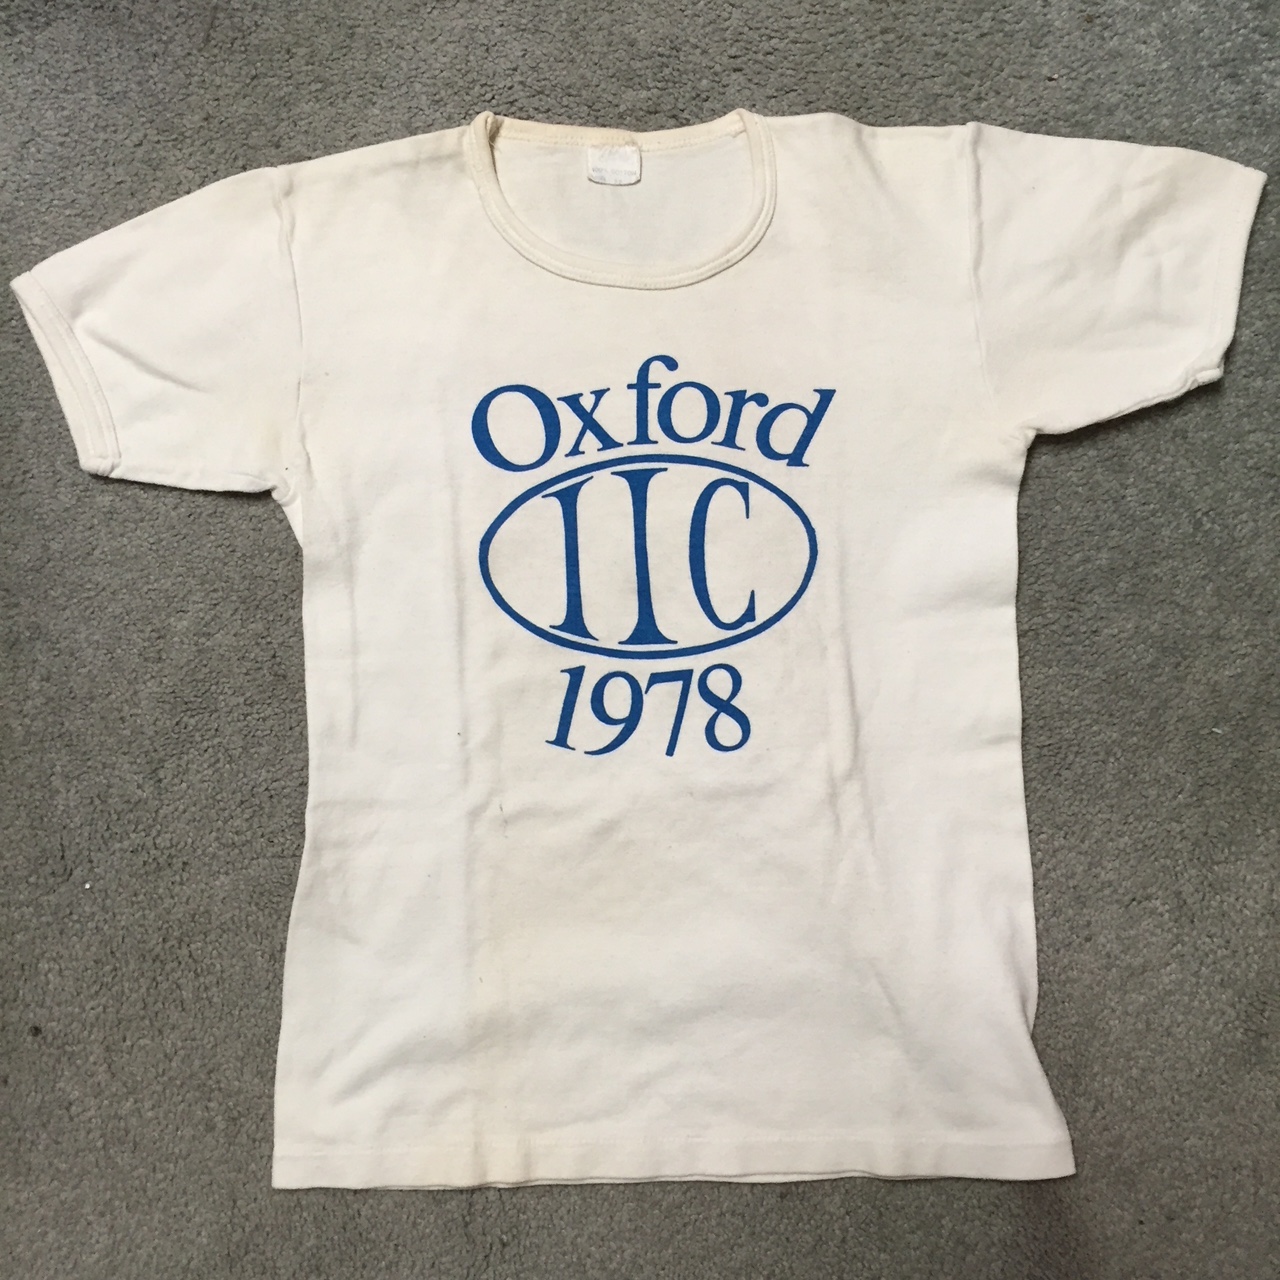 T-shirt from the 1978 IIC Congress at Oxford. T-shirt and image owned by Jean Portell.